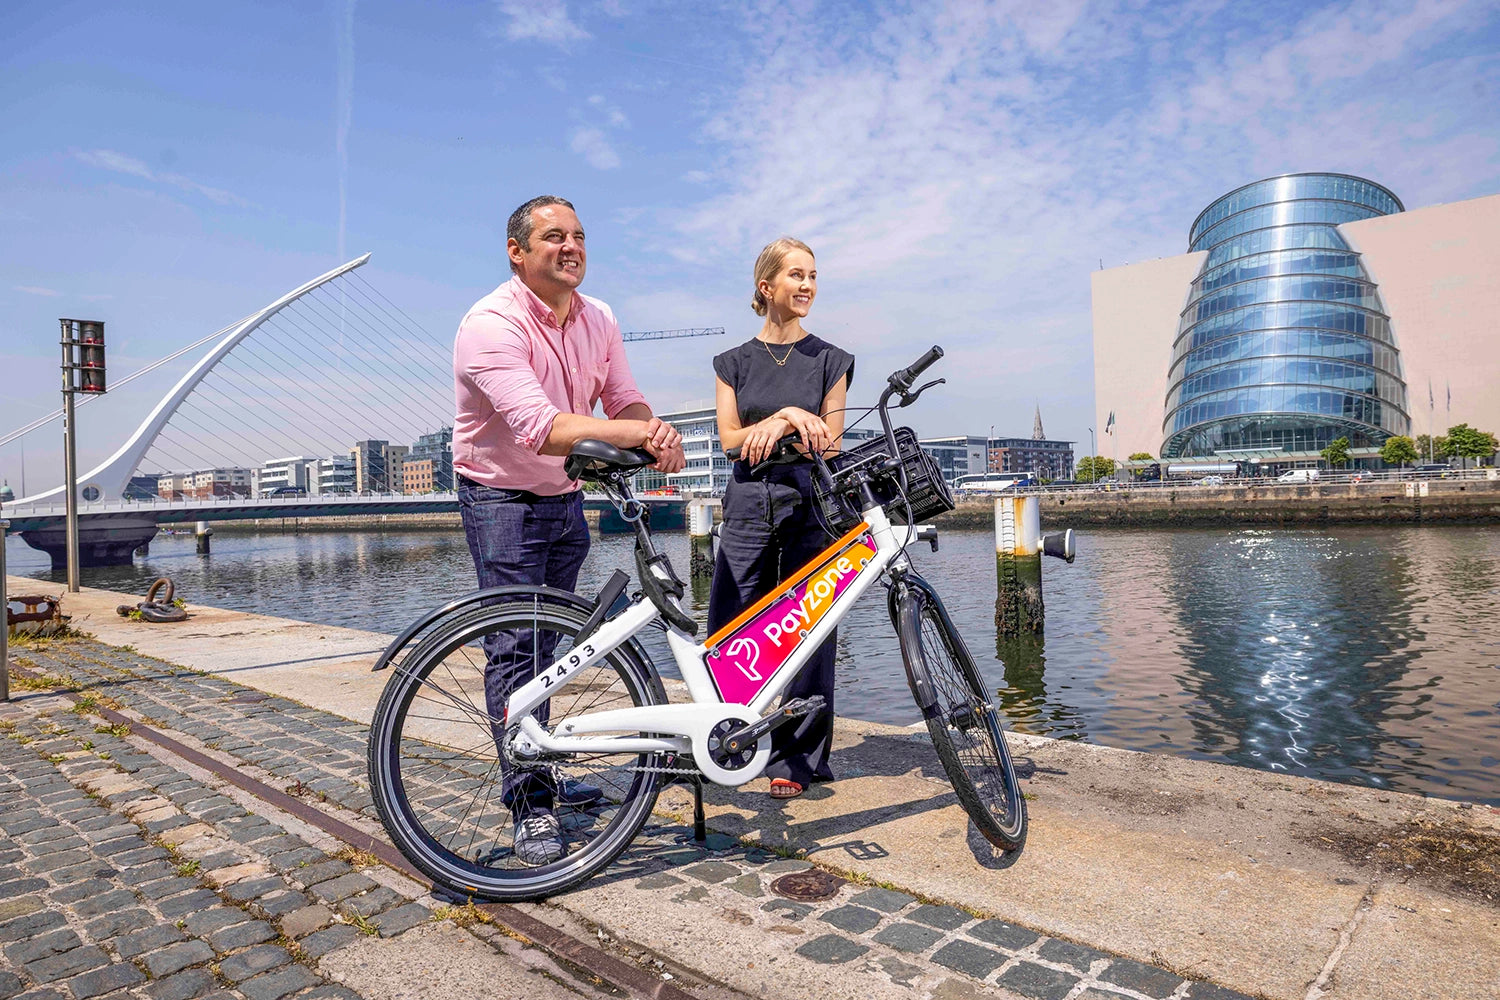 Hugh Cooney, CEO & Founder of Bleeper, and Aoife Ward, Marketing Manager at Payzone Ireland pictured at the launch in Dublin's Docklands. The Bleeper bikes have been branded with Payzone's logo on adboards on either side of the bikes. Bleeper is a public bike sharing service which operates across Dublin city.